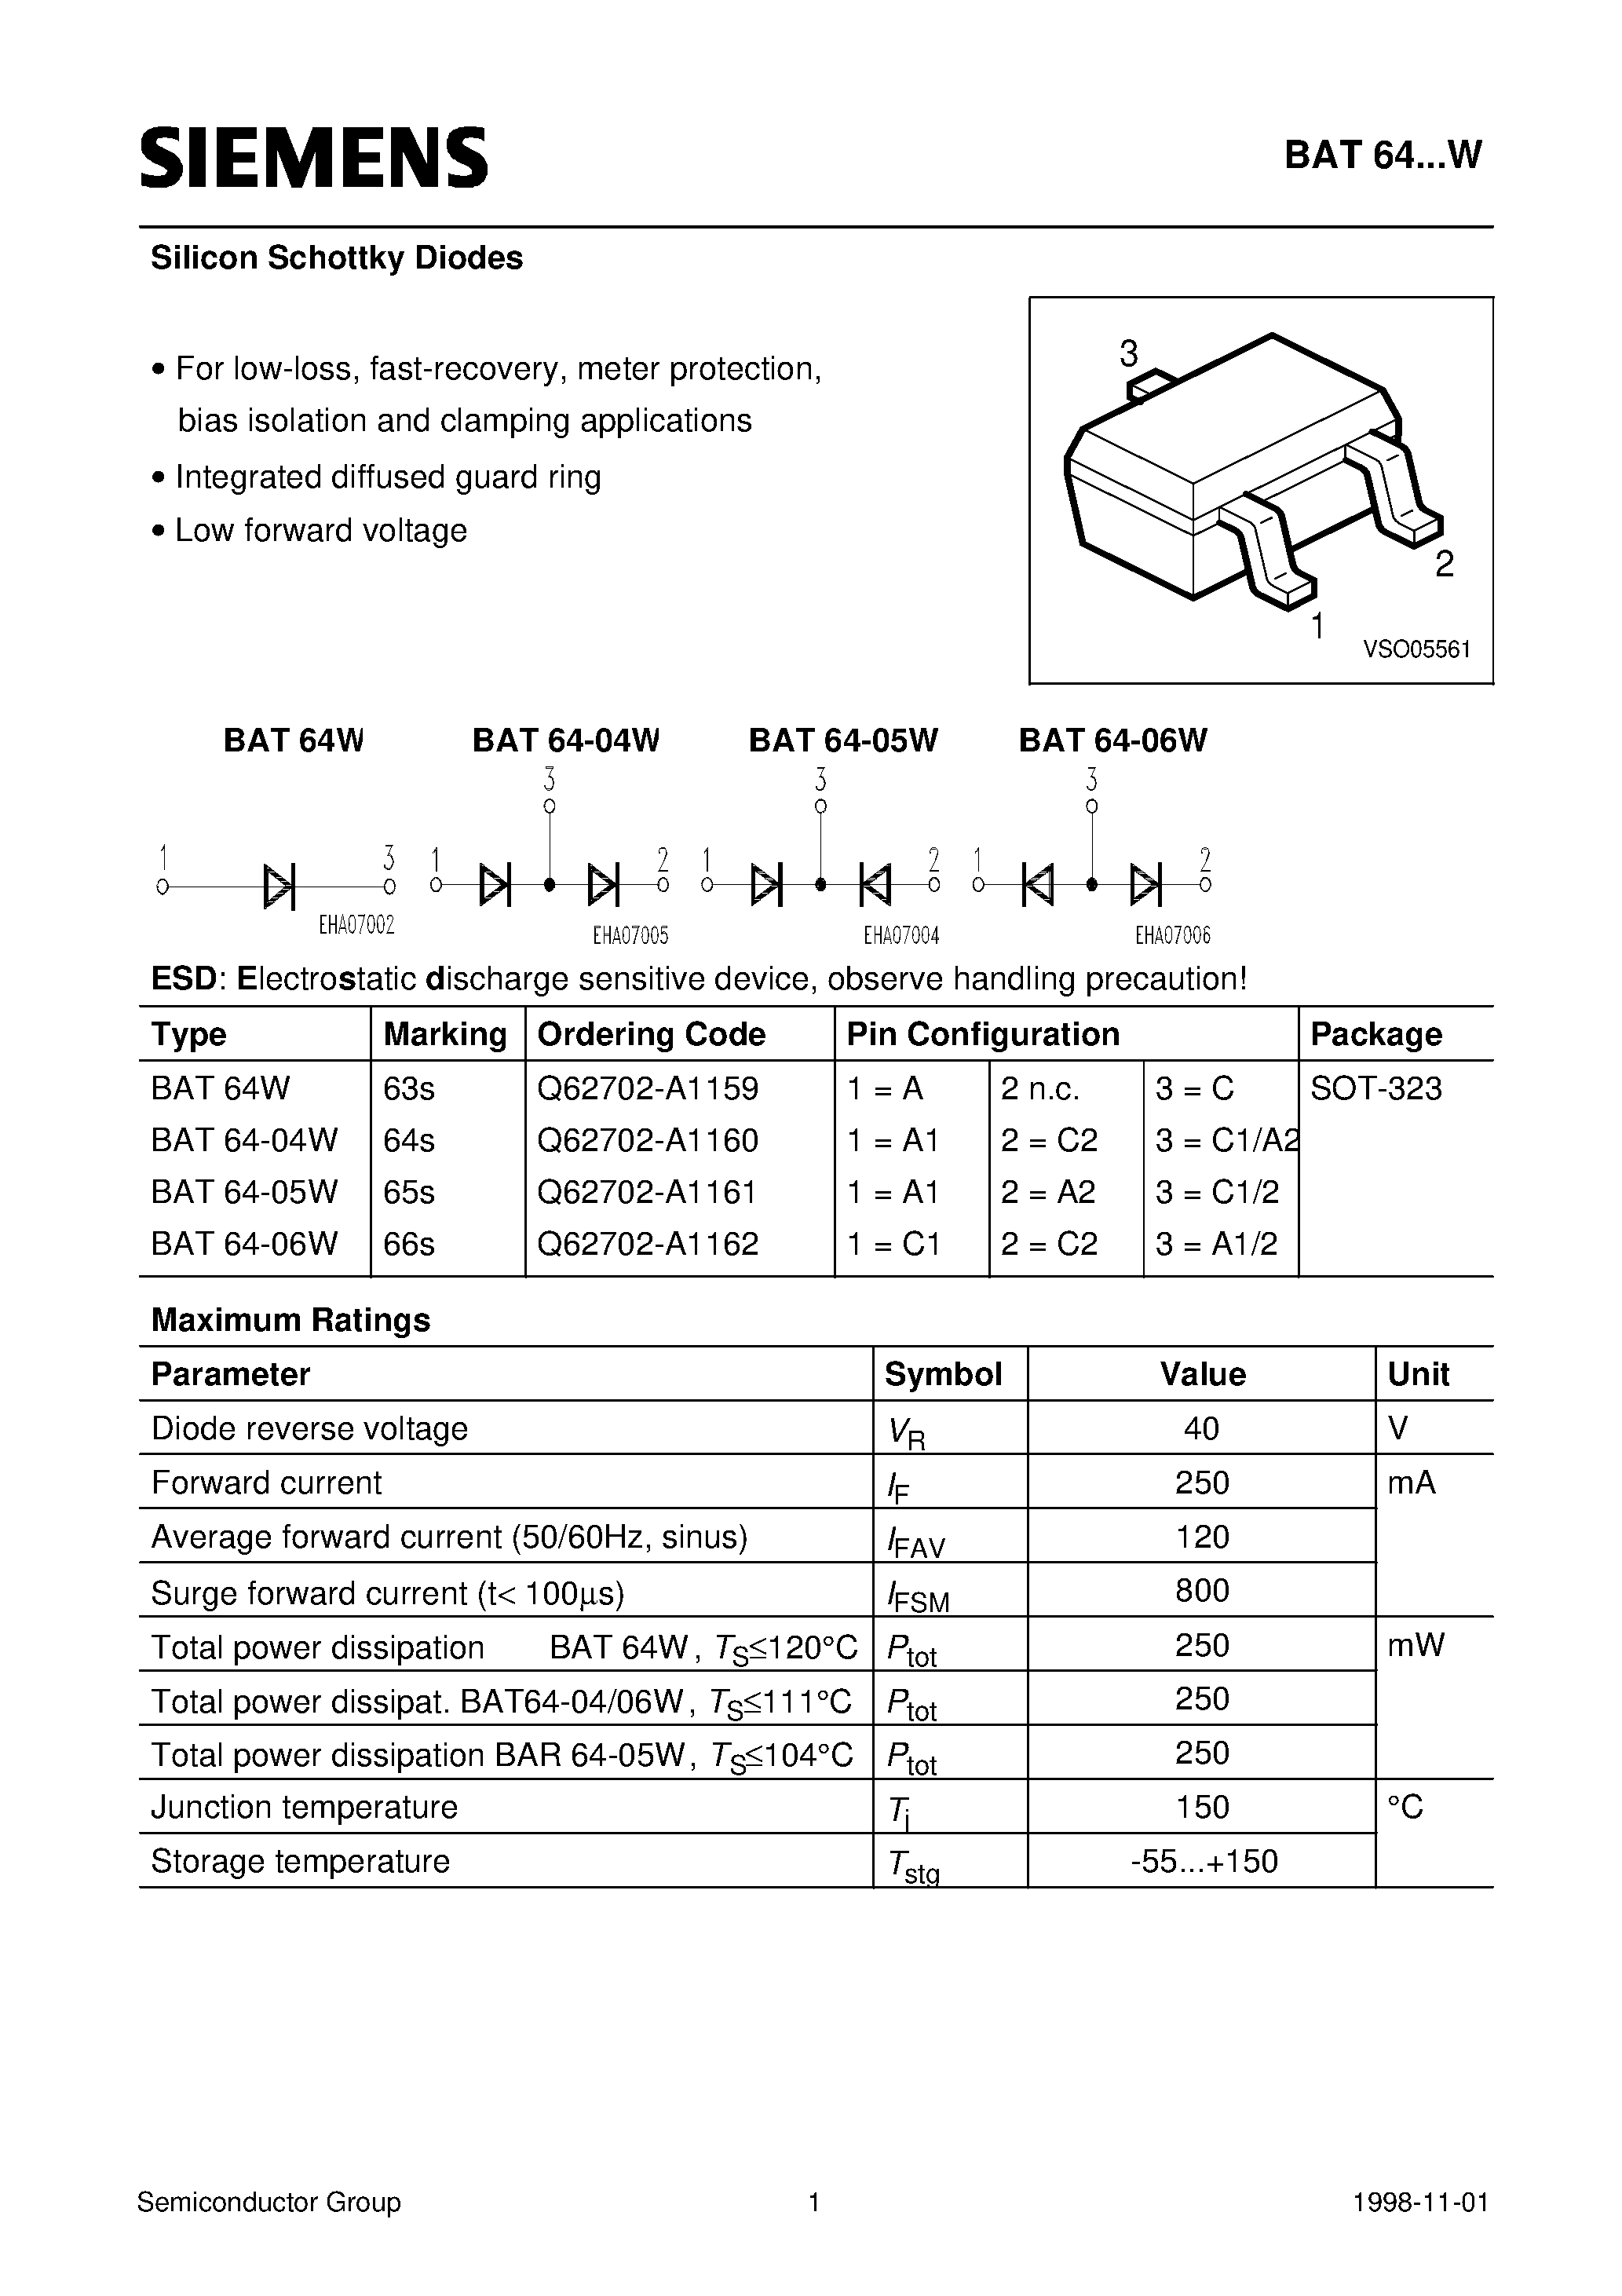 Datasheet BAT64-W - Silicon Schottky Diodes (For low-loss/ fast-recovery/ meter protection/ bias isolation and clamping applications Integrated diffused guard ring) page 1